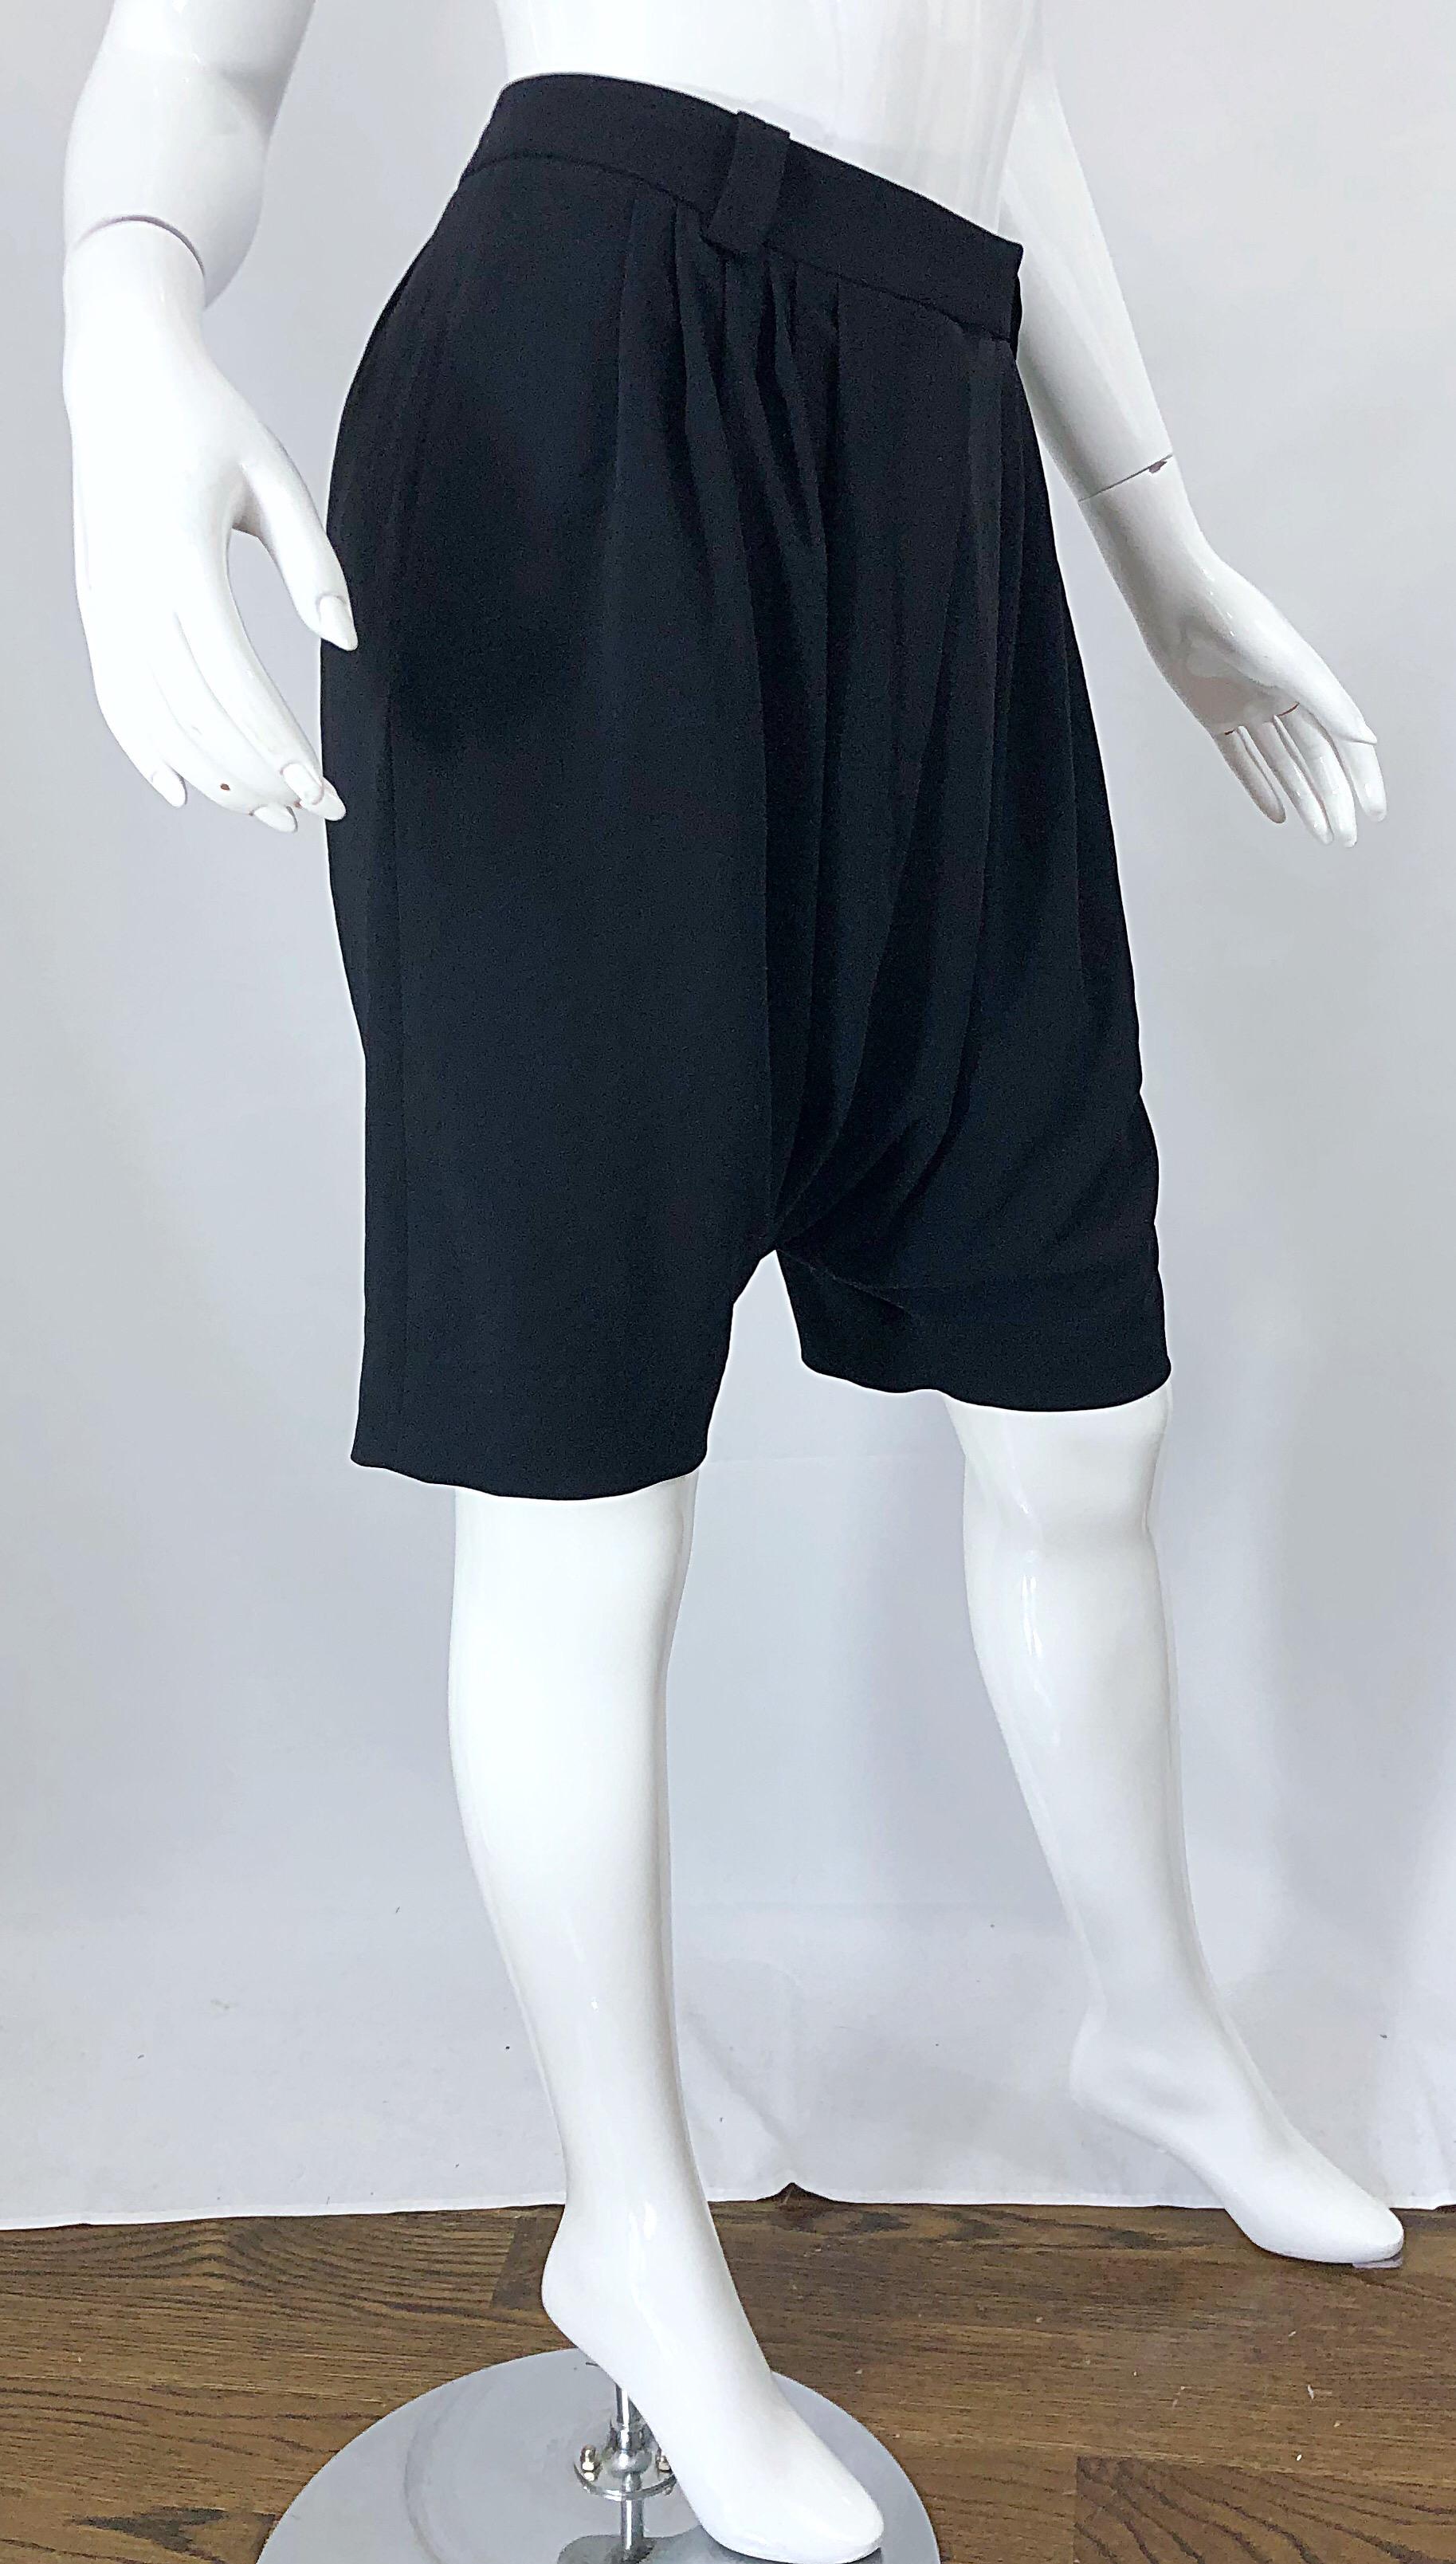 NWT Givenchy by Clare Waight Keller Size 40 / 8 Black Drop Crotch / Waist Shorts For Sale 2